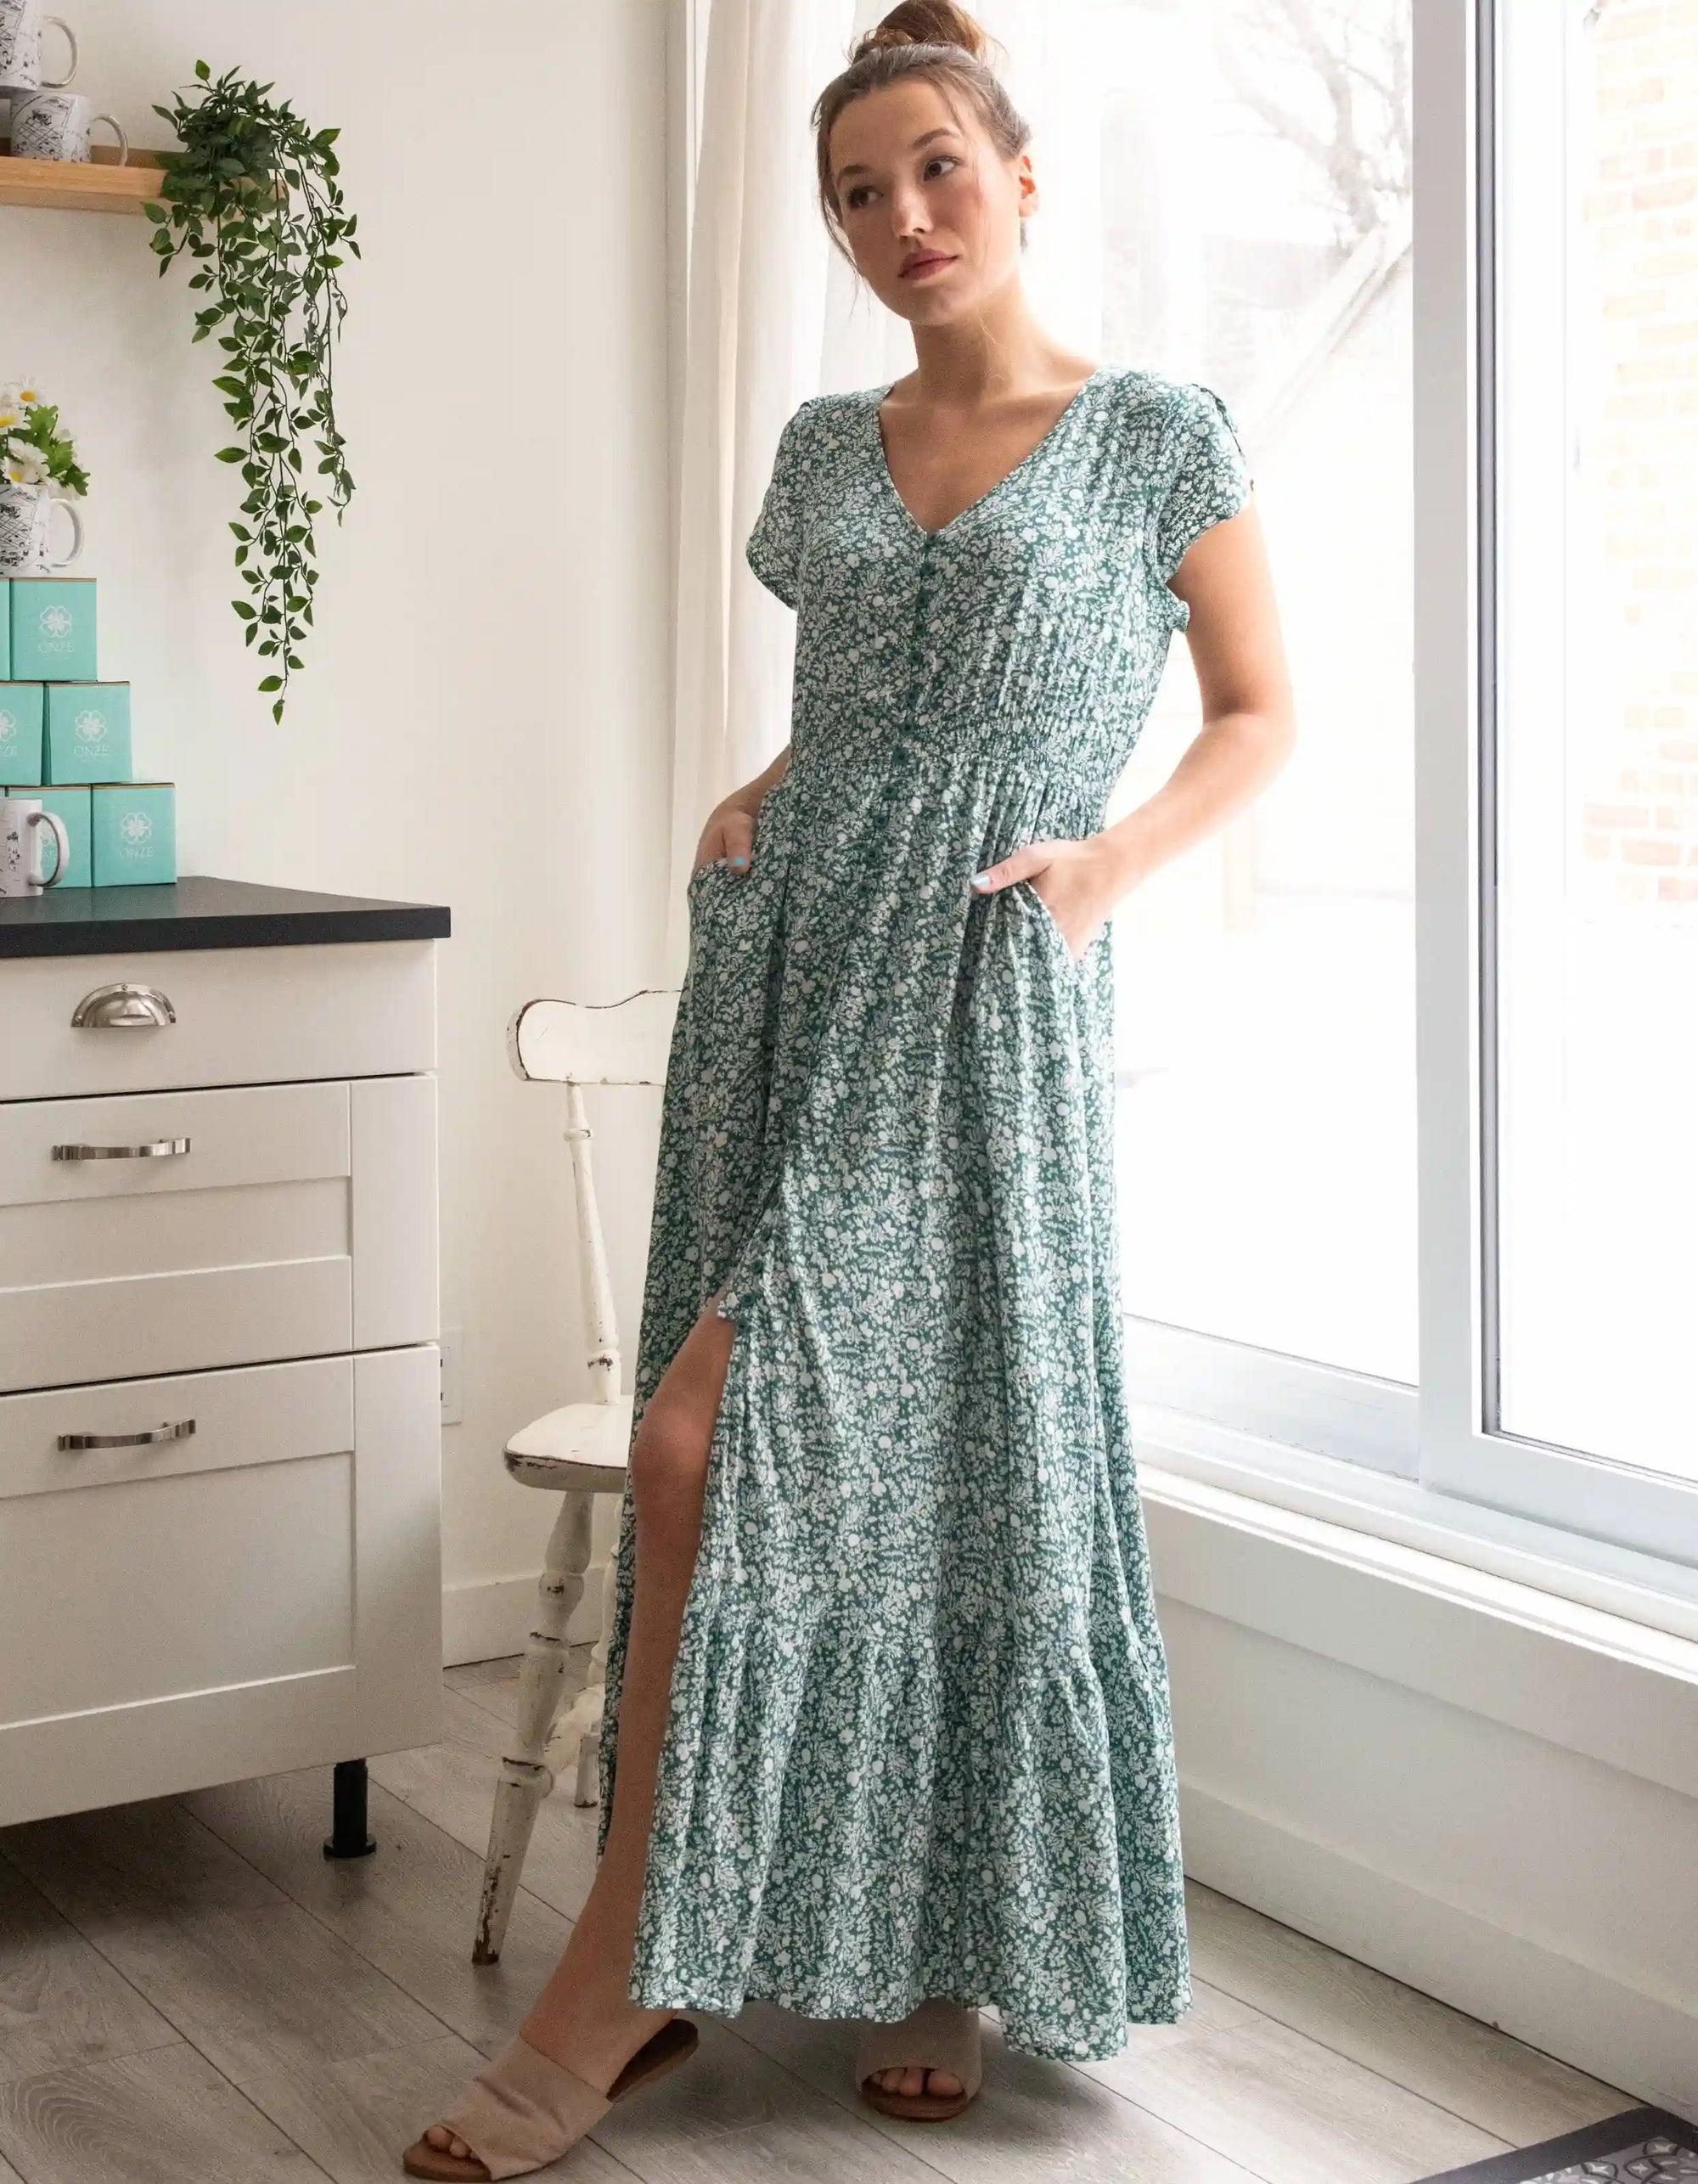 How to Style Your Maxi Dress for All Occasions